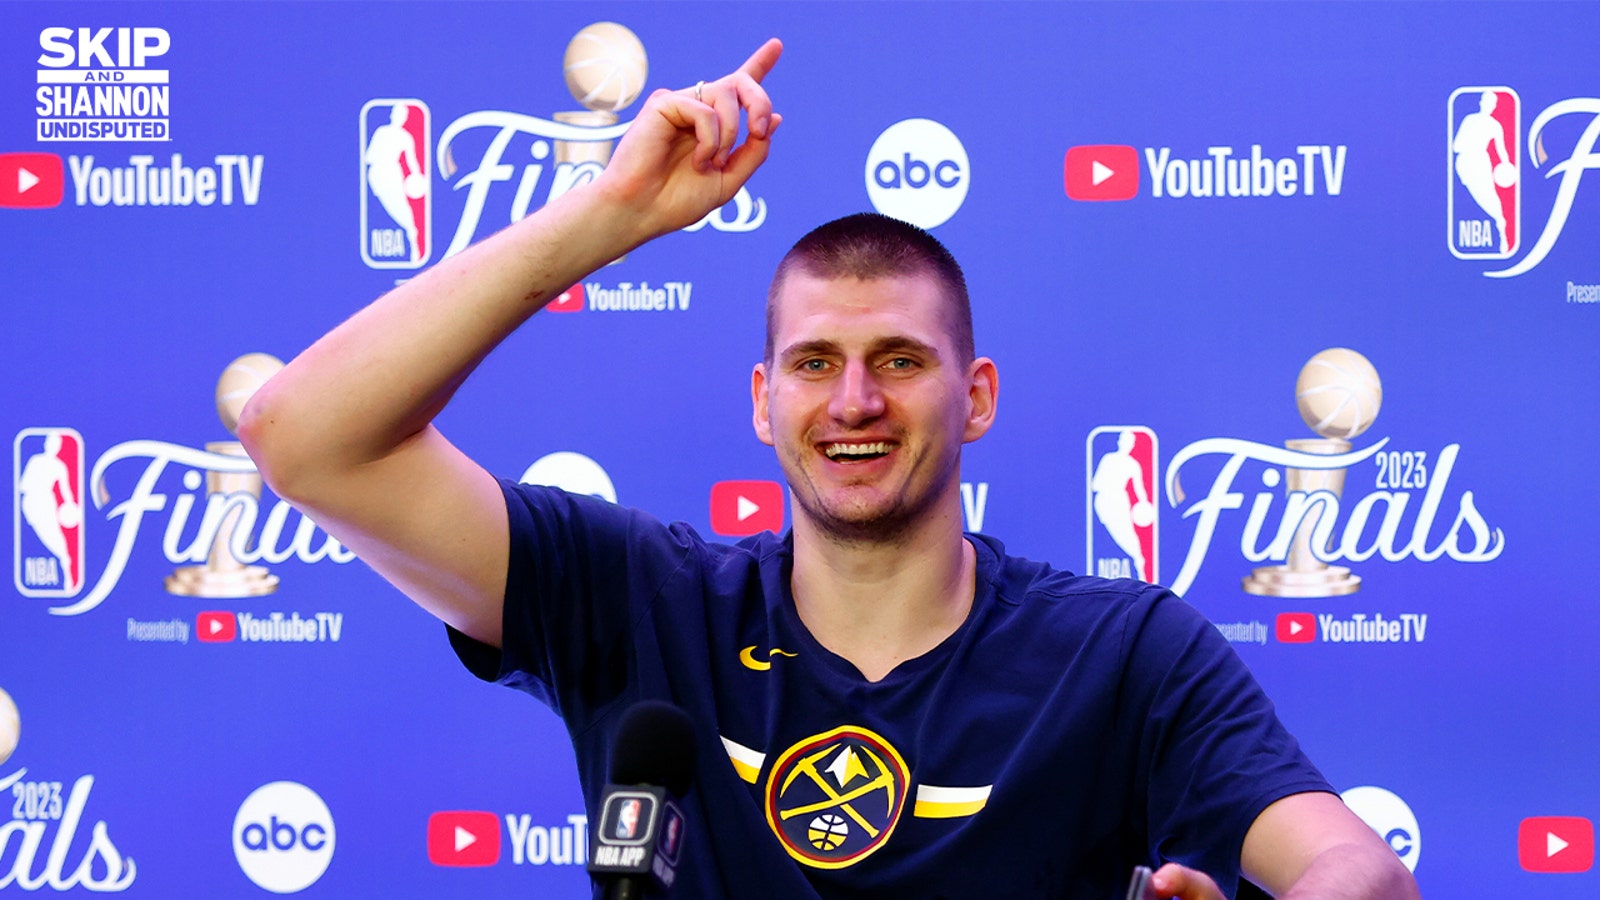 Nikola Jokic is first player ever to lead NBA playoffs in points, rebounds and assists